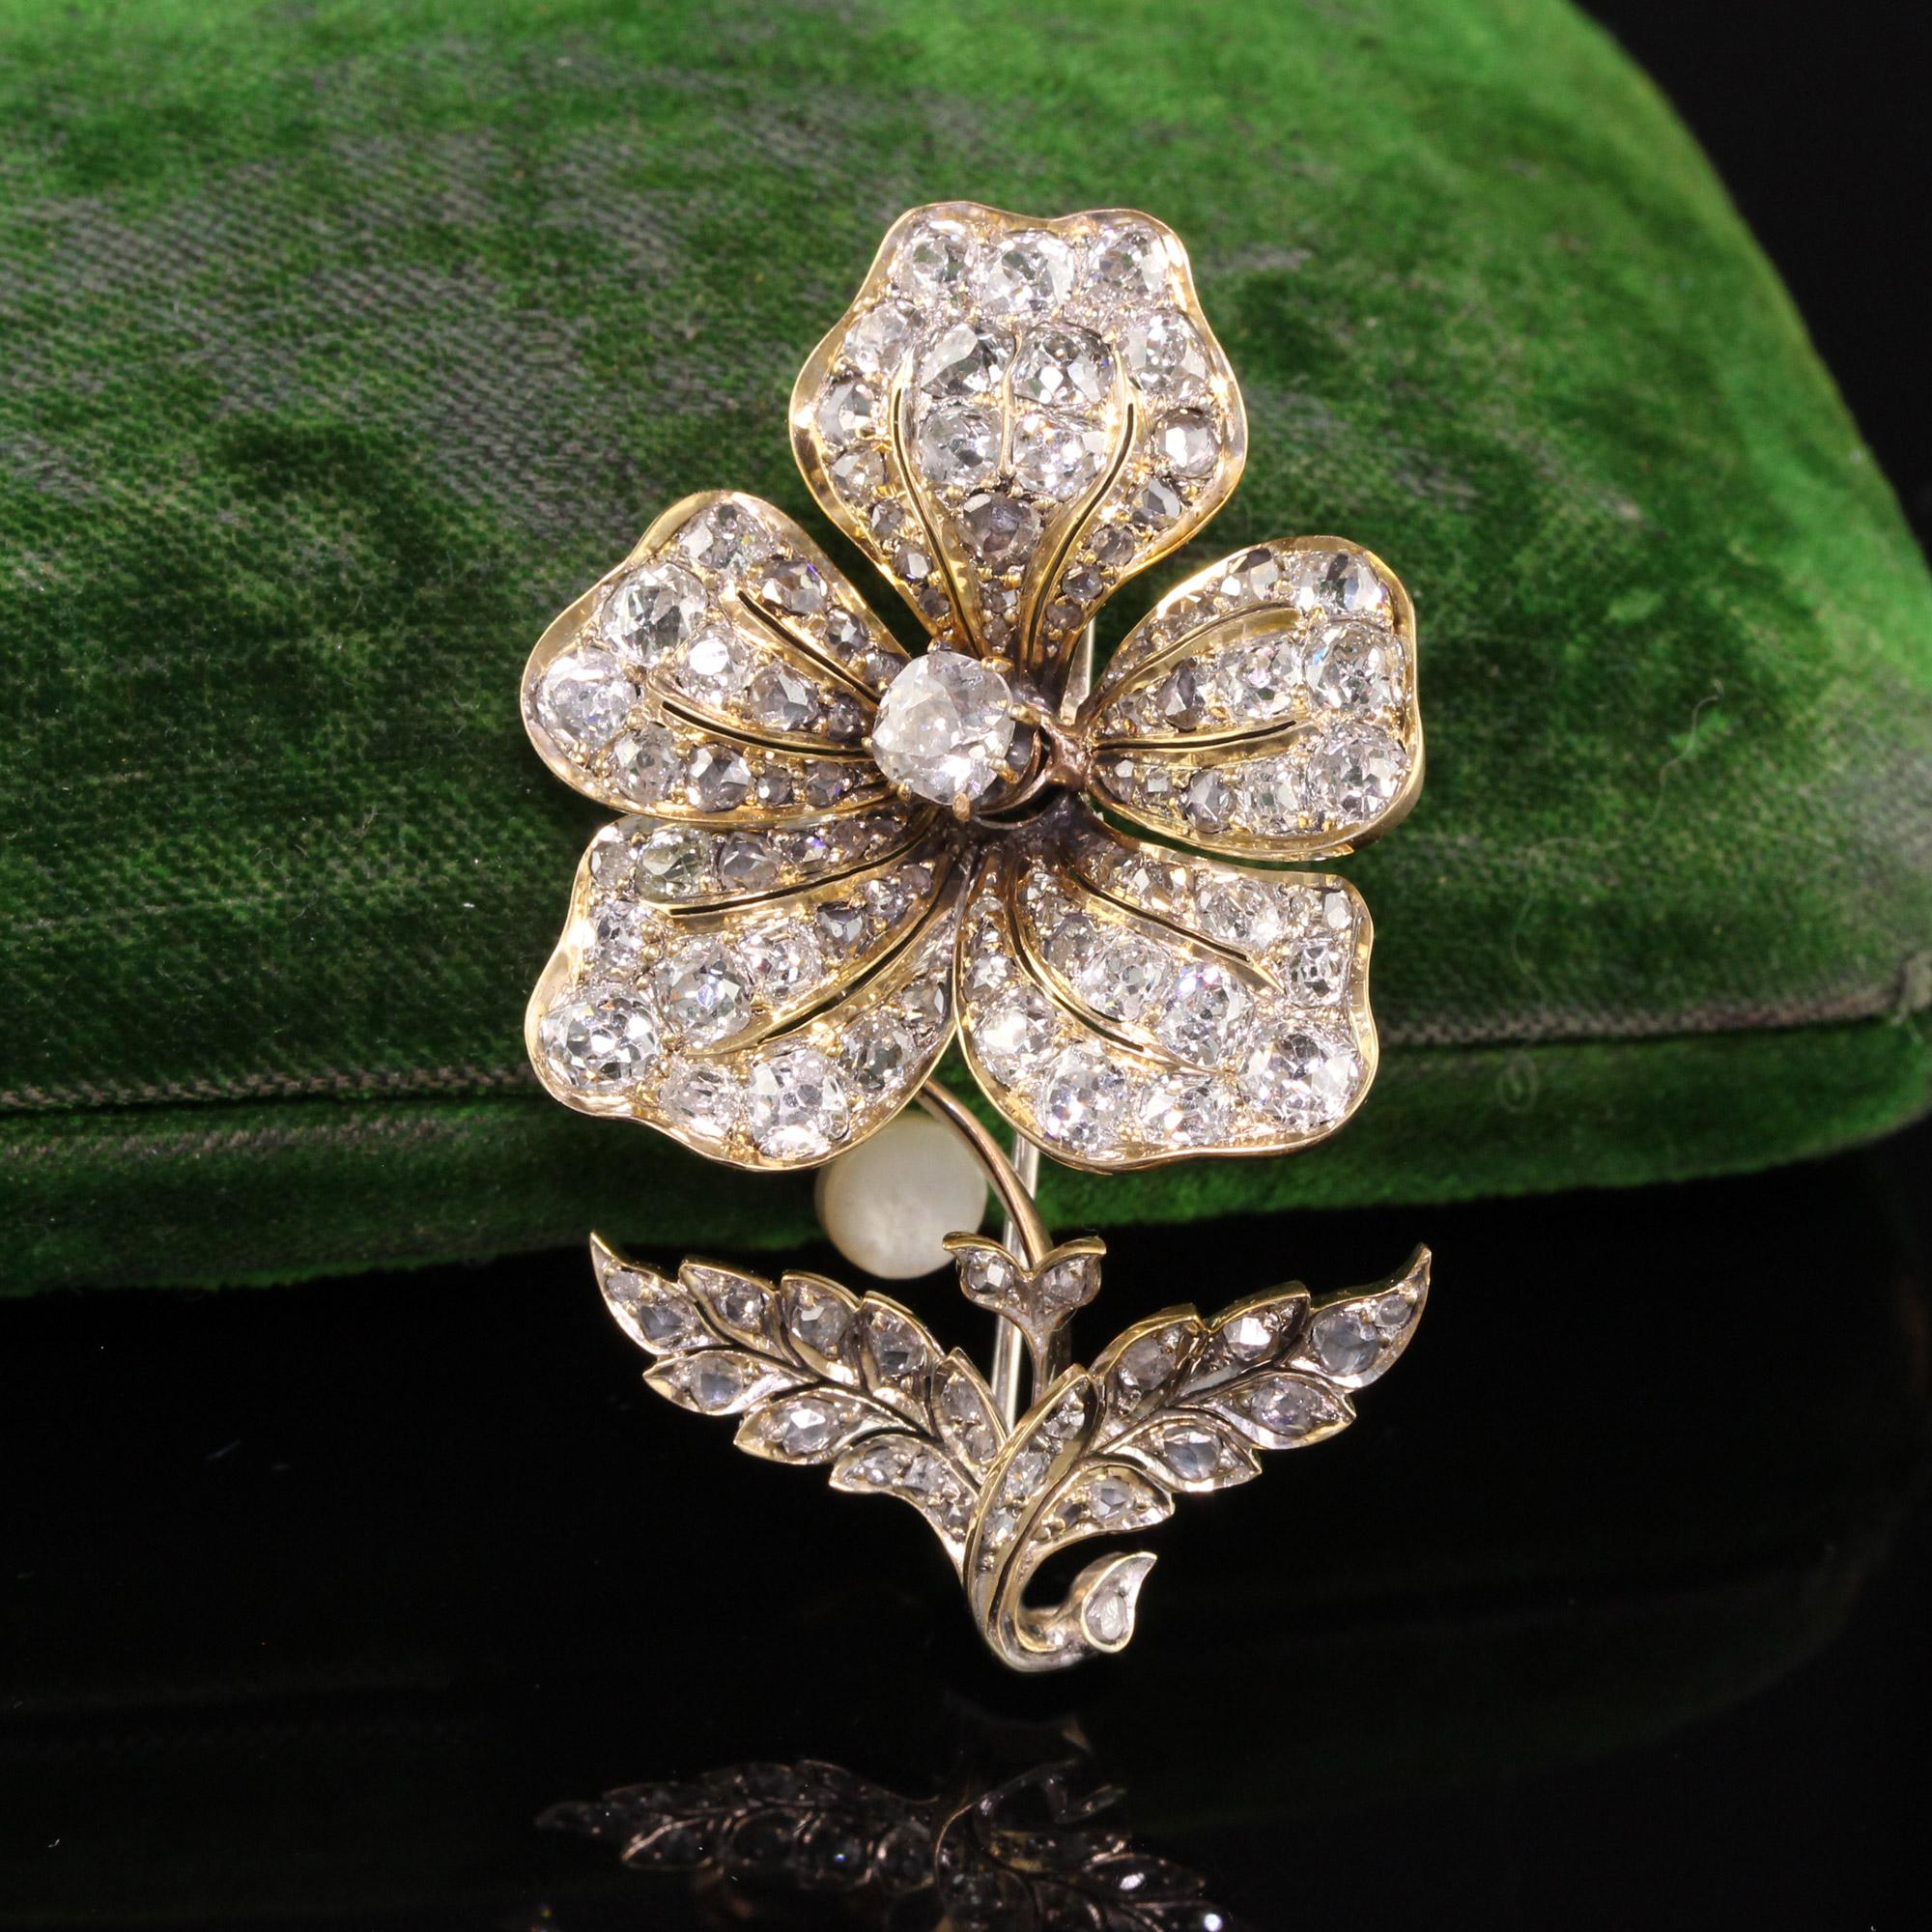 Beautiful Antique Victorian 18K Yellow Gold Old Mine Diamond En Tremblant Flower Pin. This gorgeous flower pin is crafted in 18k yellow gold with a white gold clasp. The flower has old mine cut diamonds set all over the flower. Some of the petals